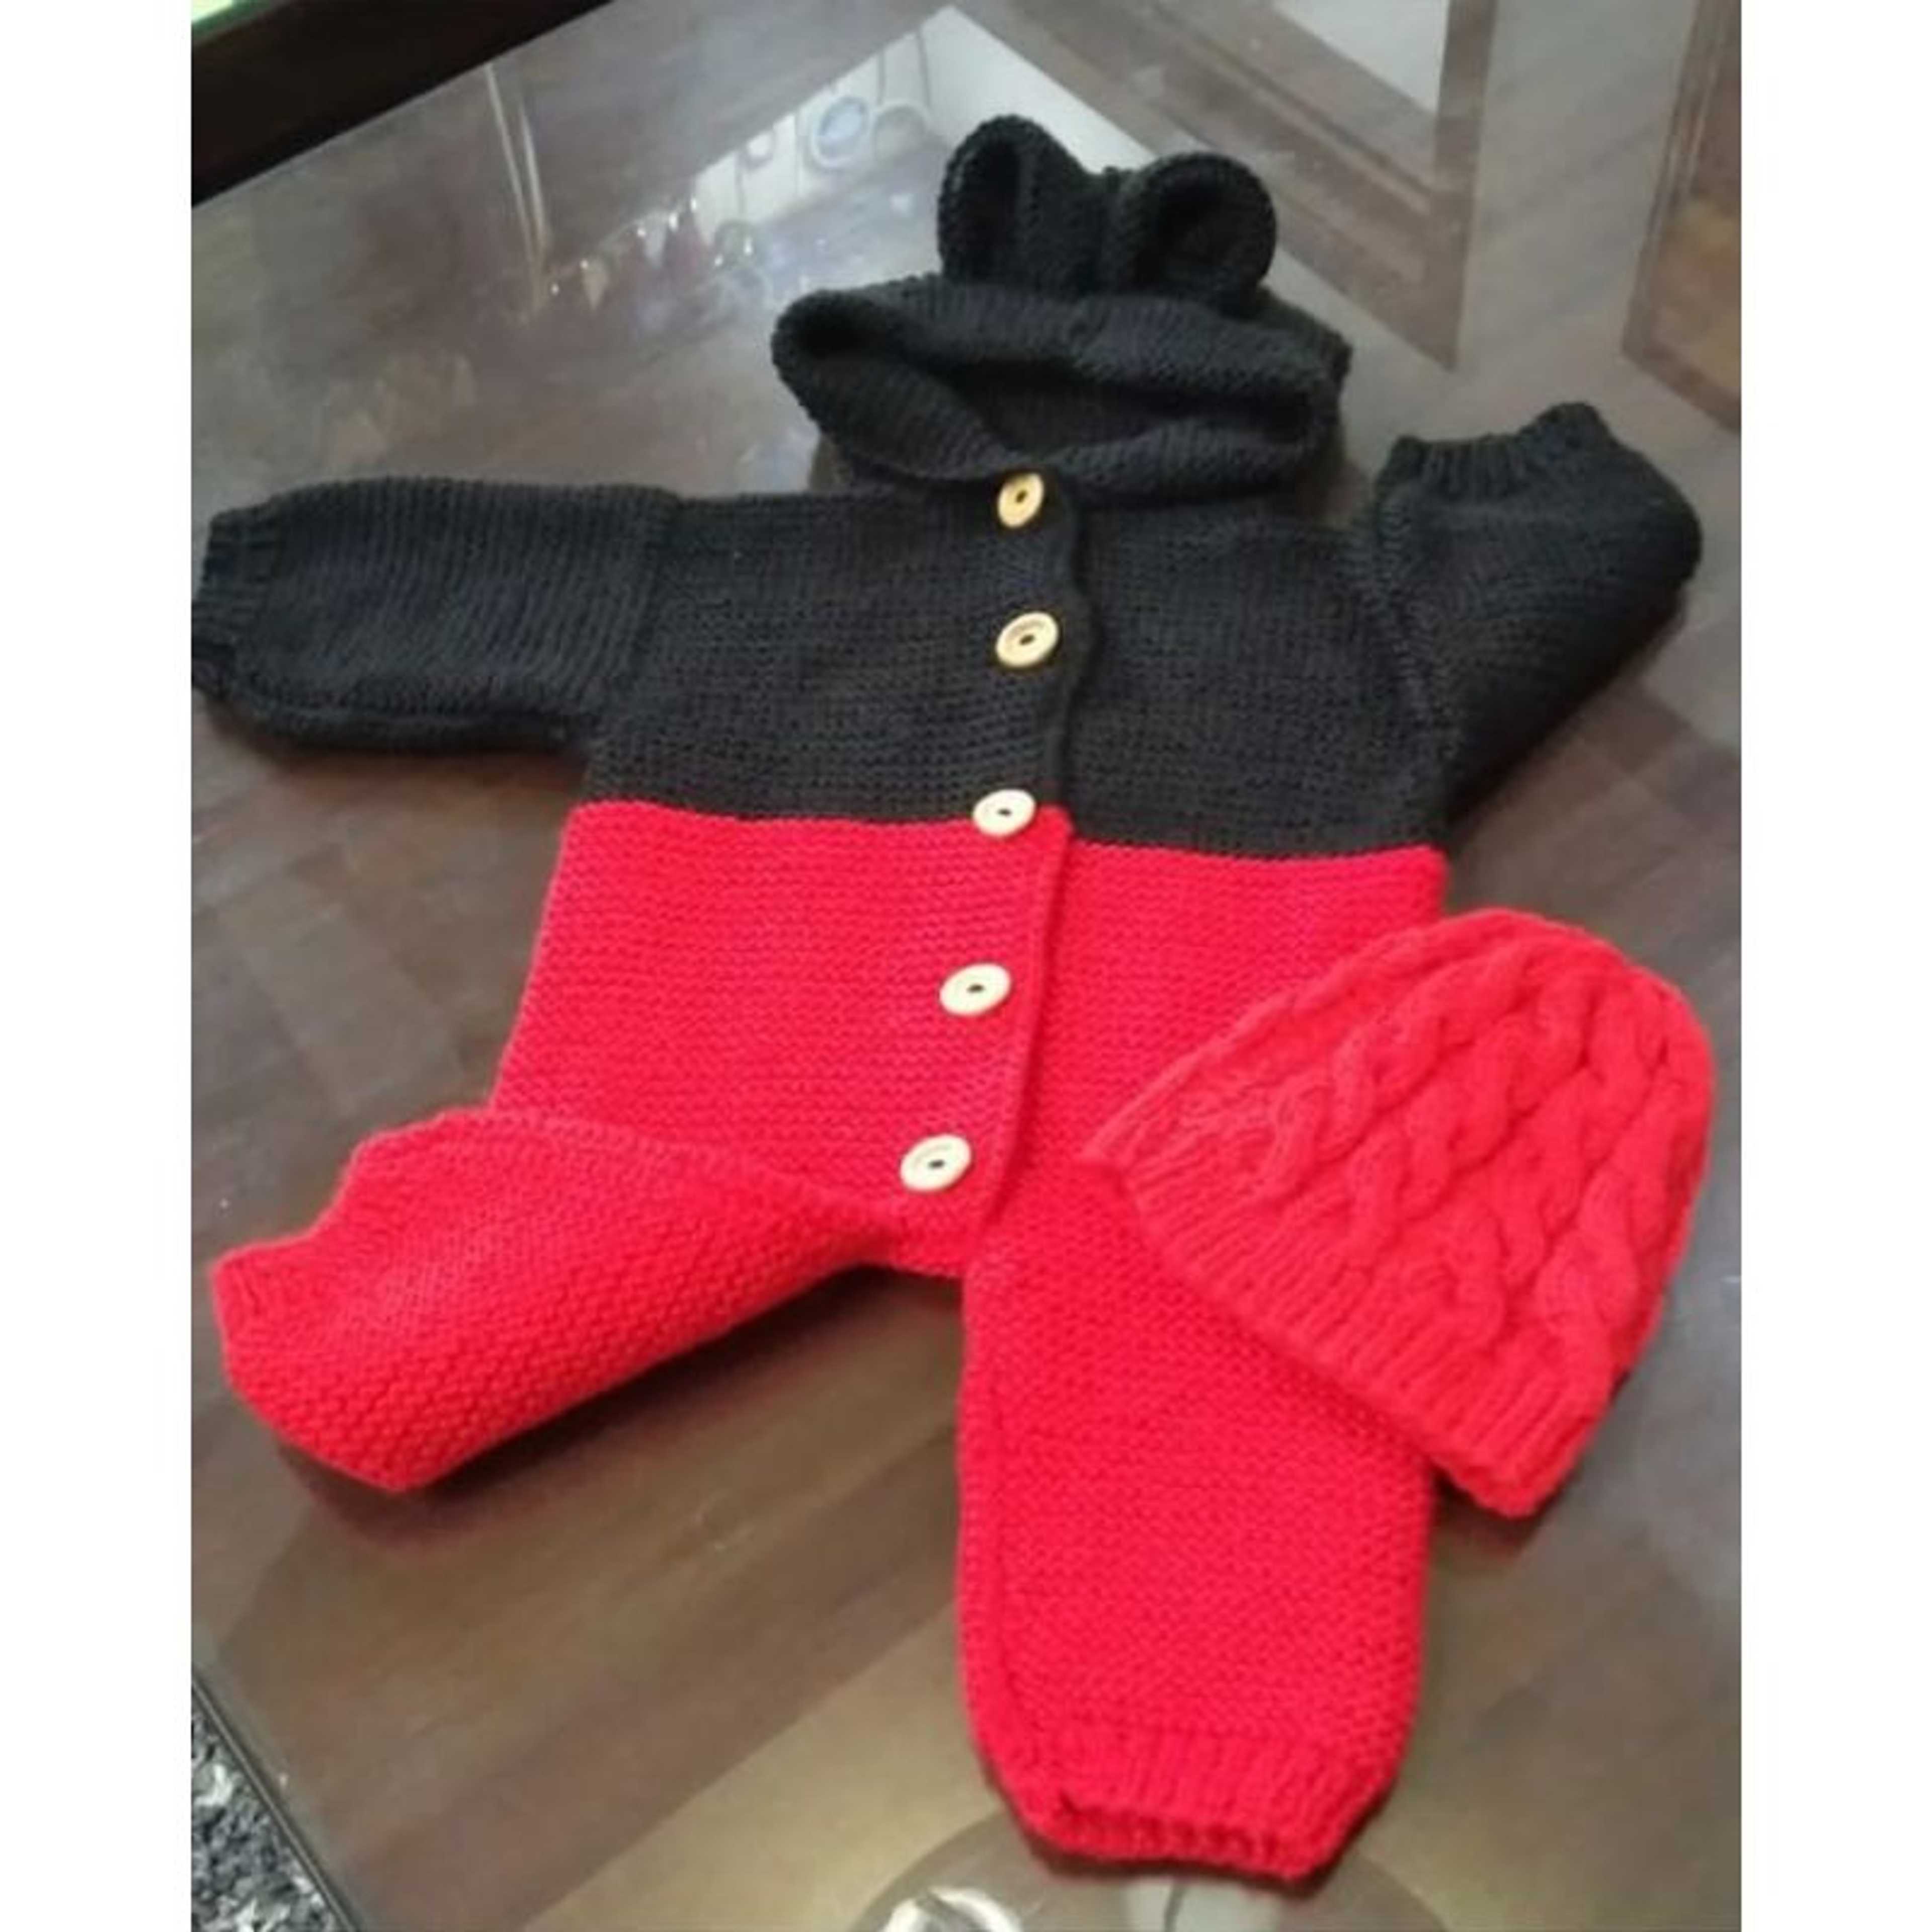 Complete Romper Set Handmade - Black and Red Color (0 to 6 Months Size)